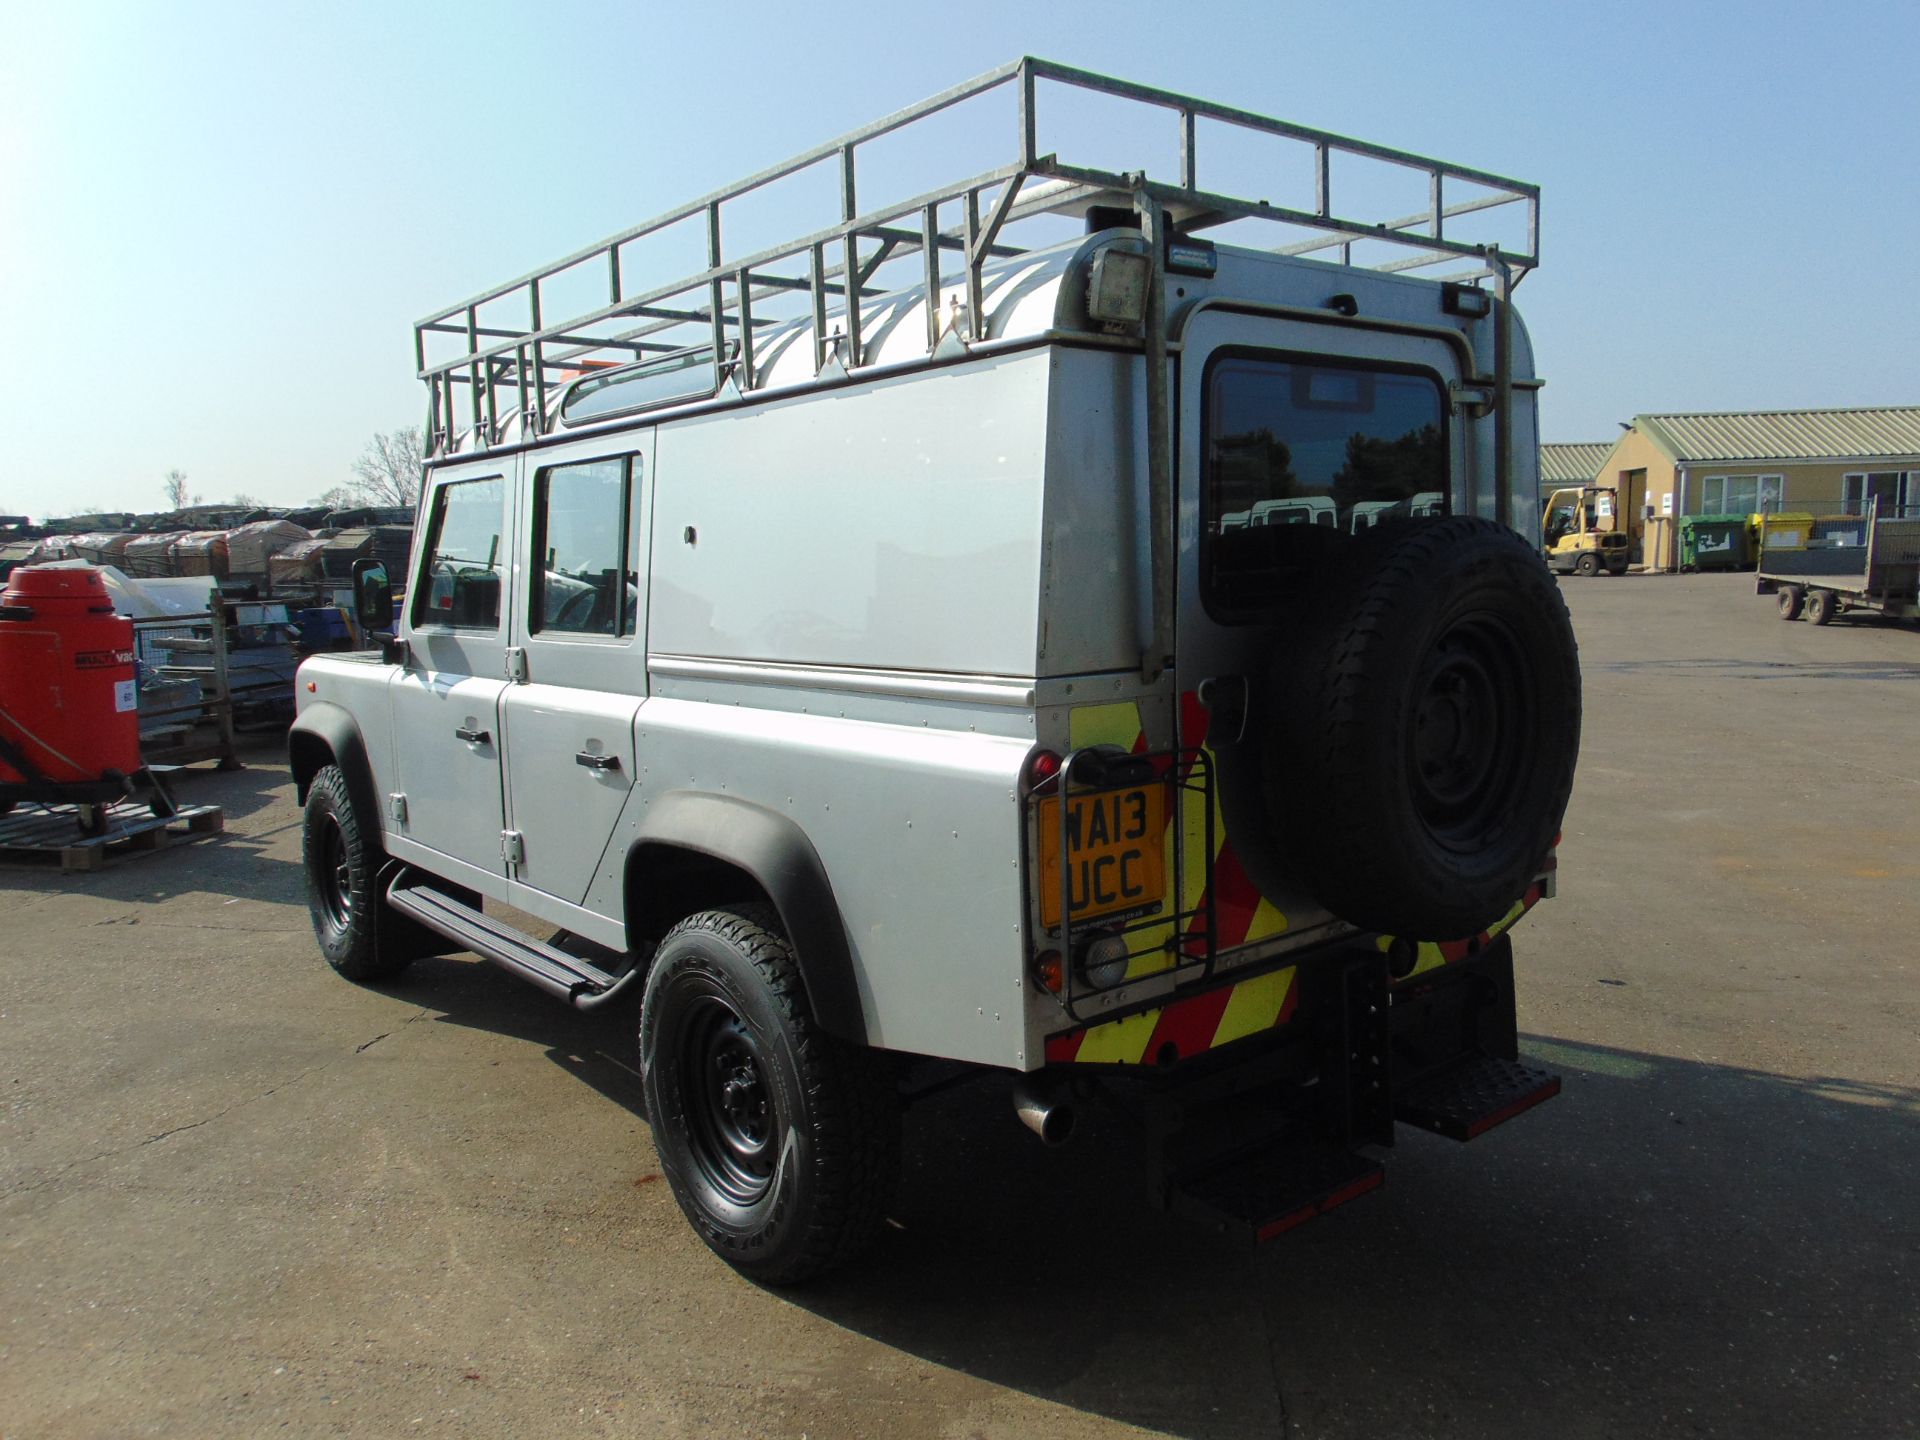 1 Owner 2013 Land Rover Defender 110 Utility 5 door 5 seater ONLY 83,117 MILES! - Image 8 of 33